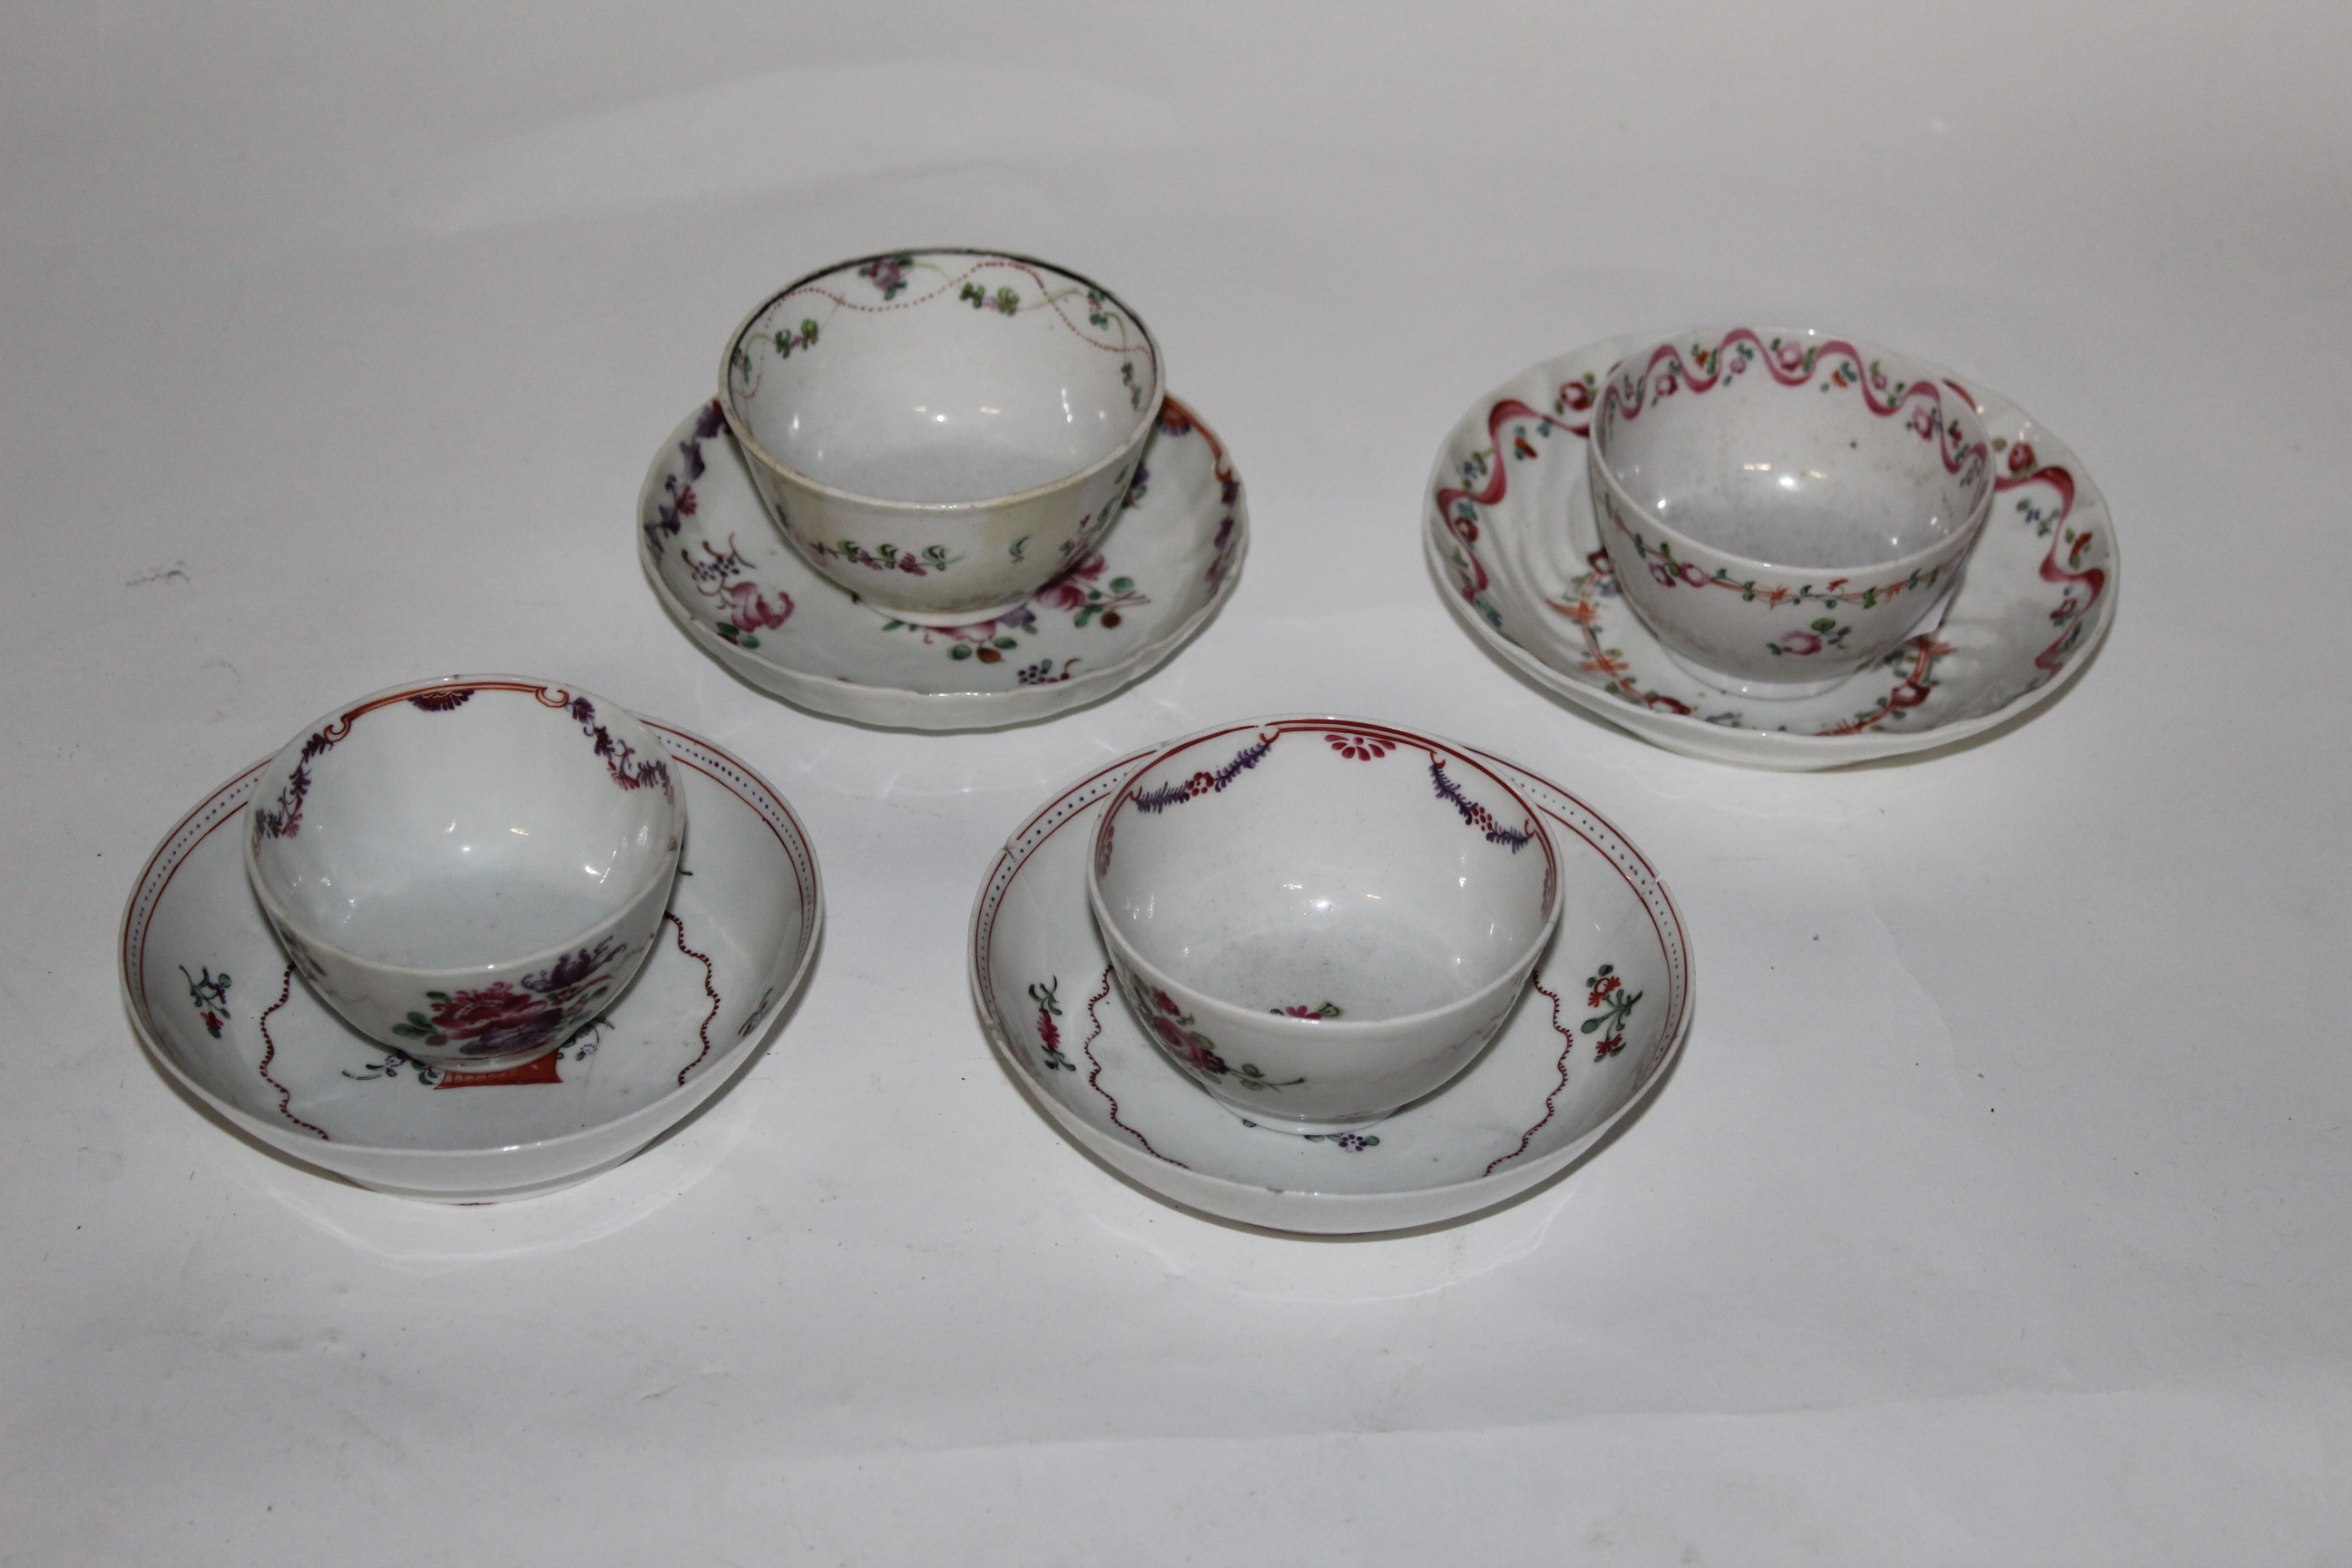 An early 19th century English porcelain tea bowl and saucer,